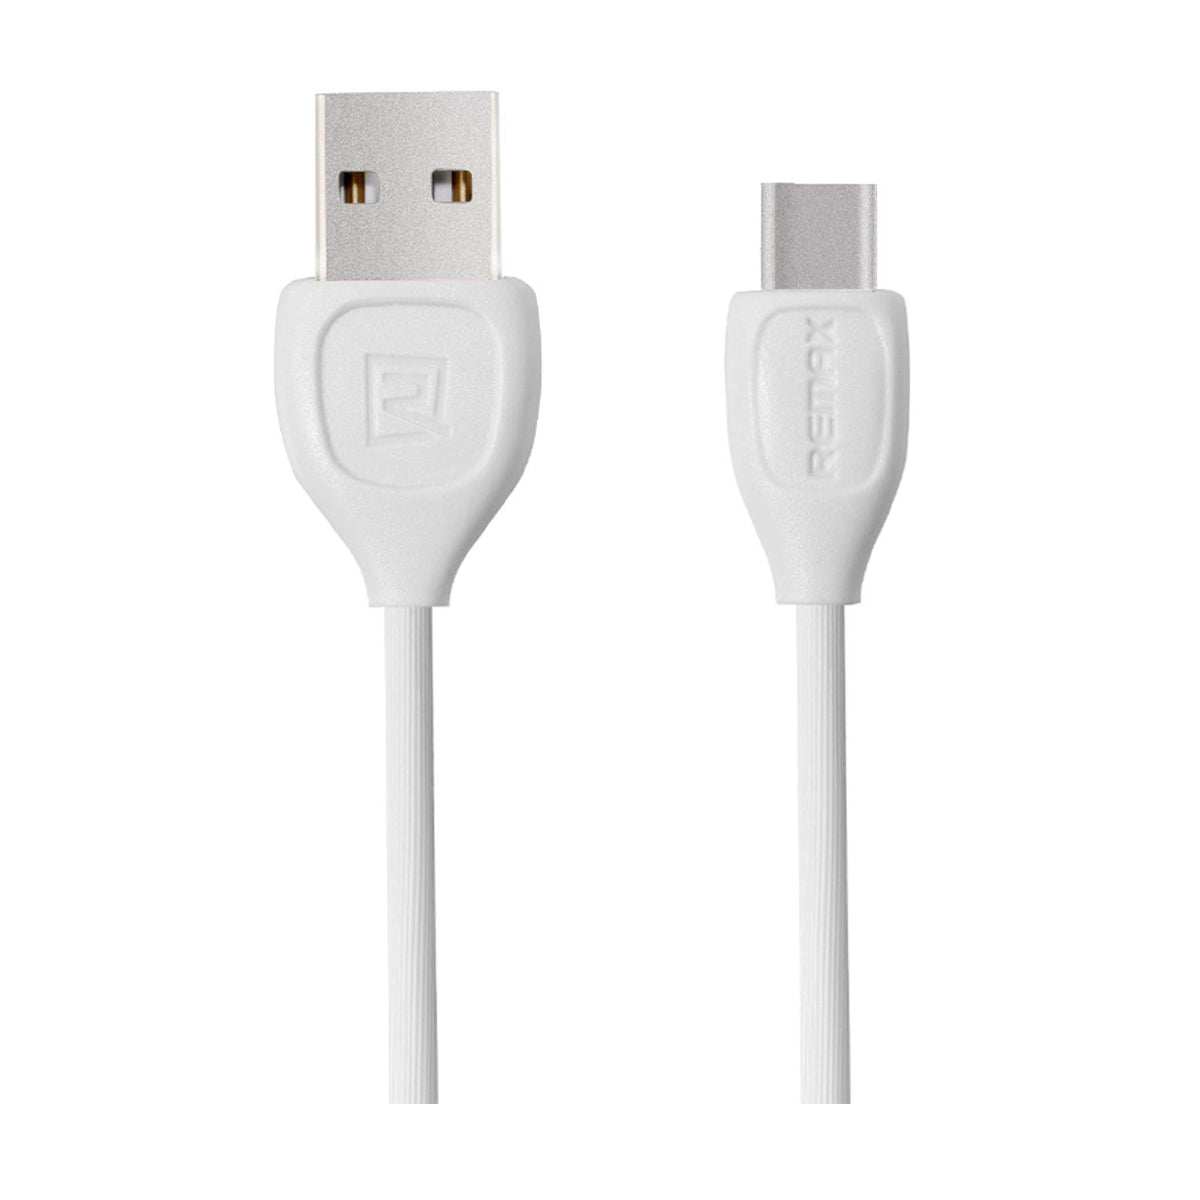 USB A to Micro USB Fast Charging Cable, Micro USB Cable Android Charger